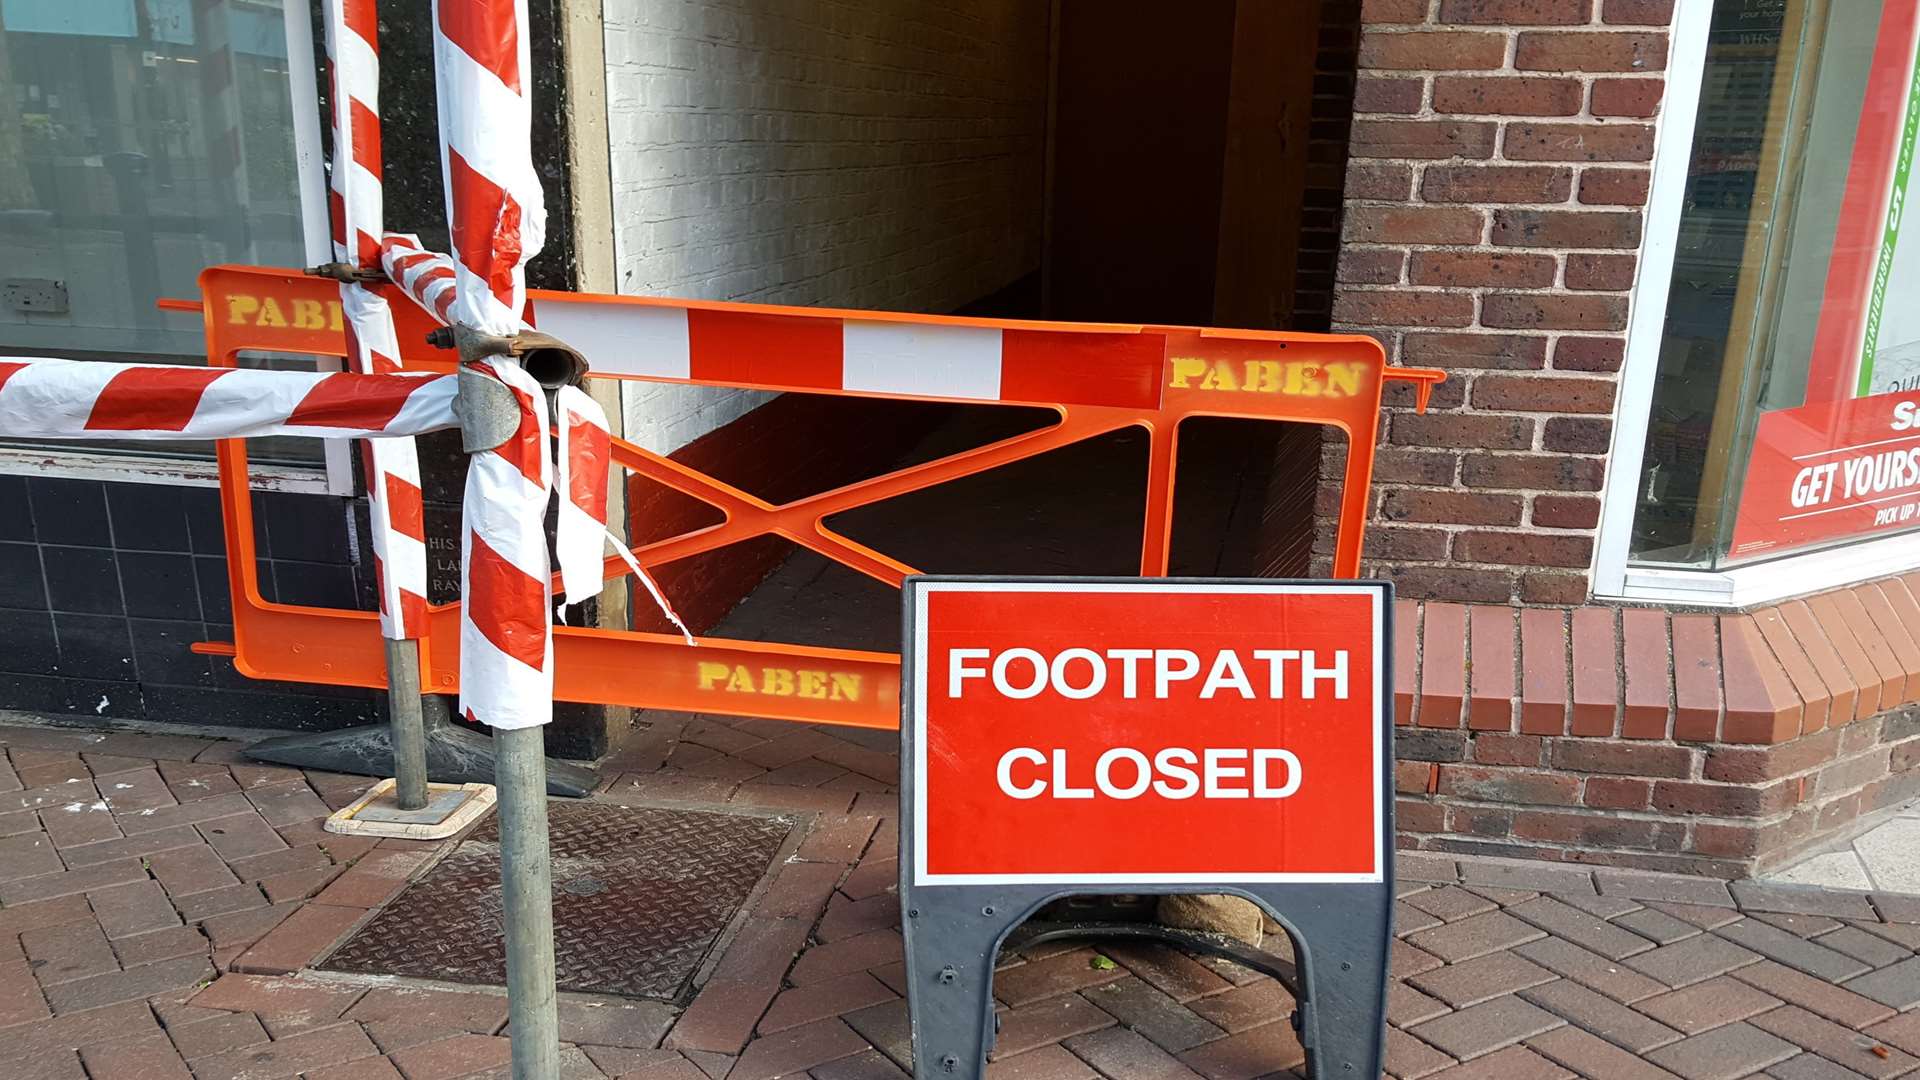 The alleyway was closed on Monday